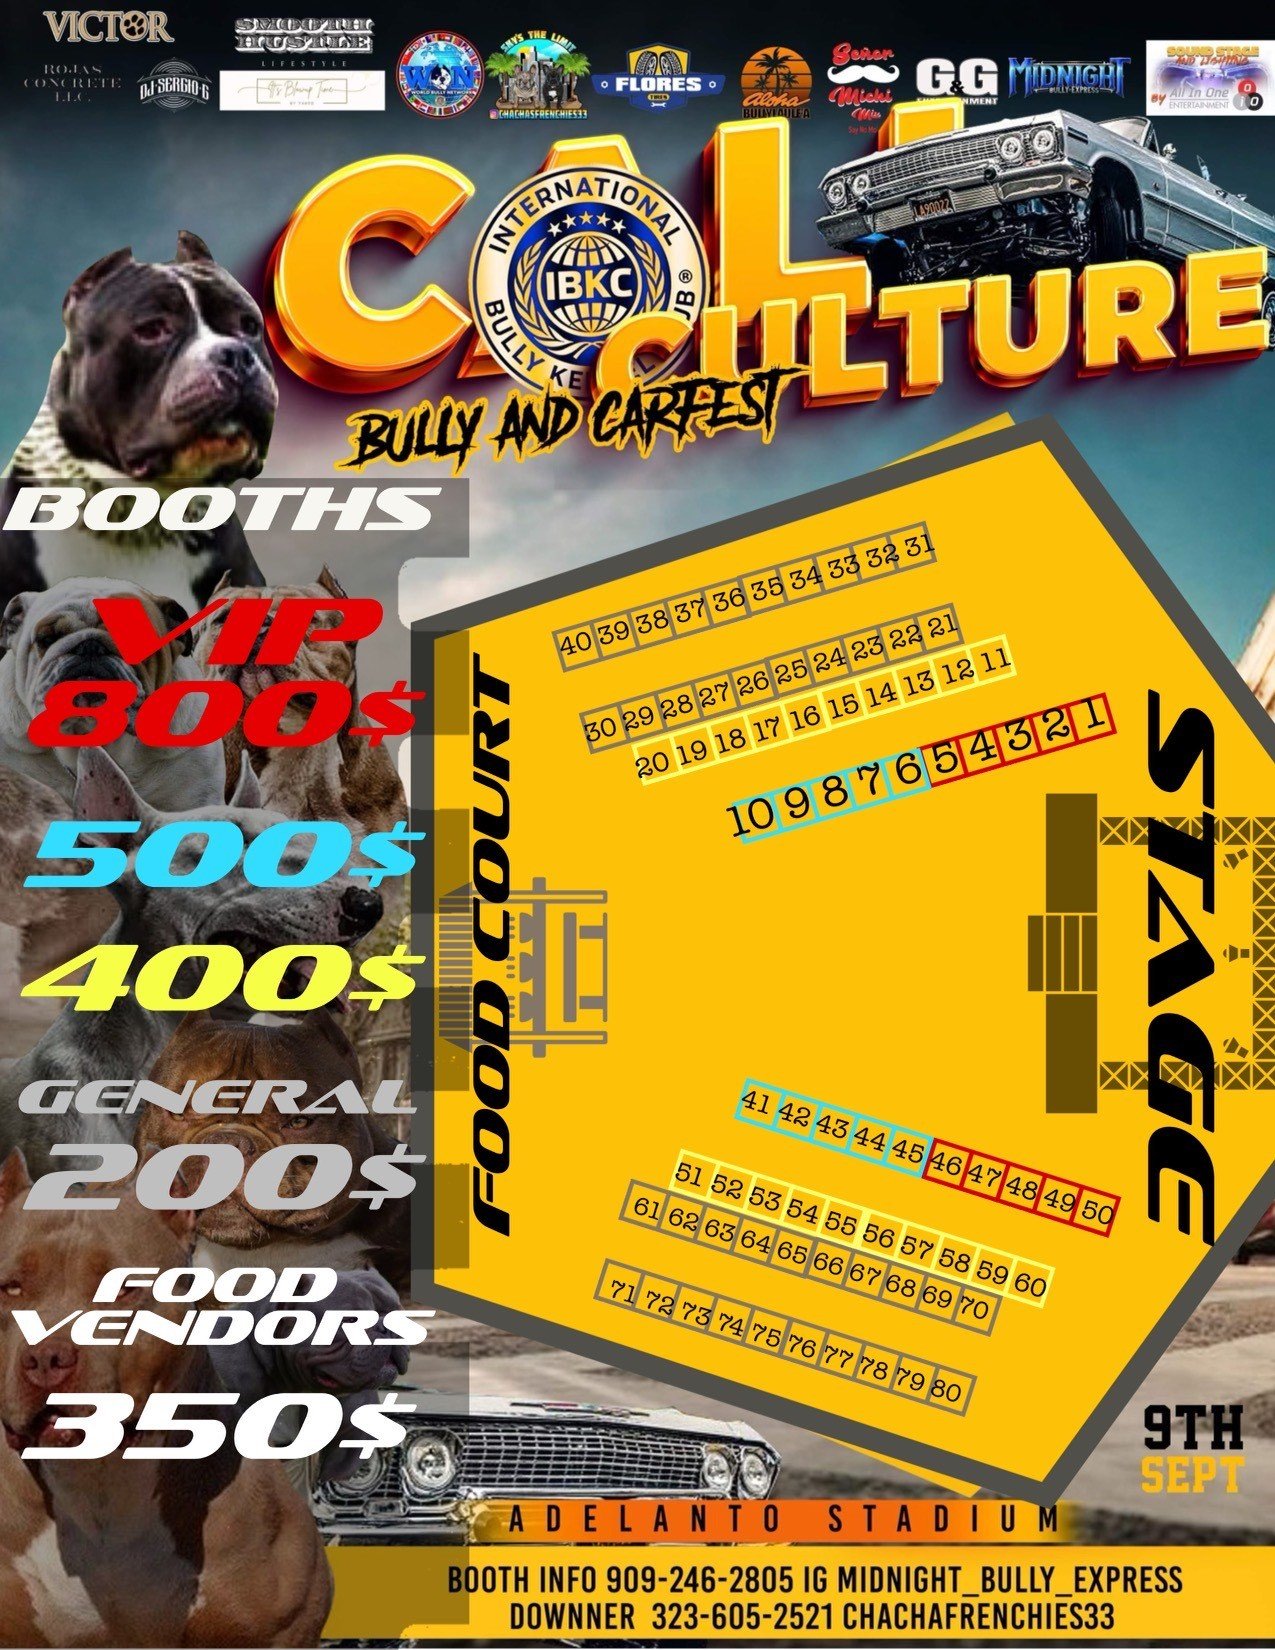 cail culture bully show booth map.jpg